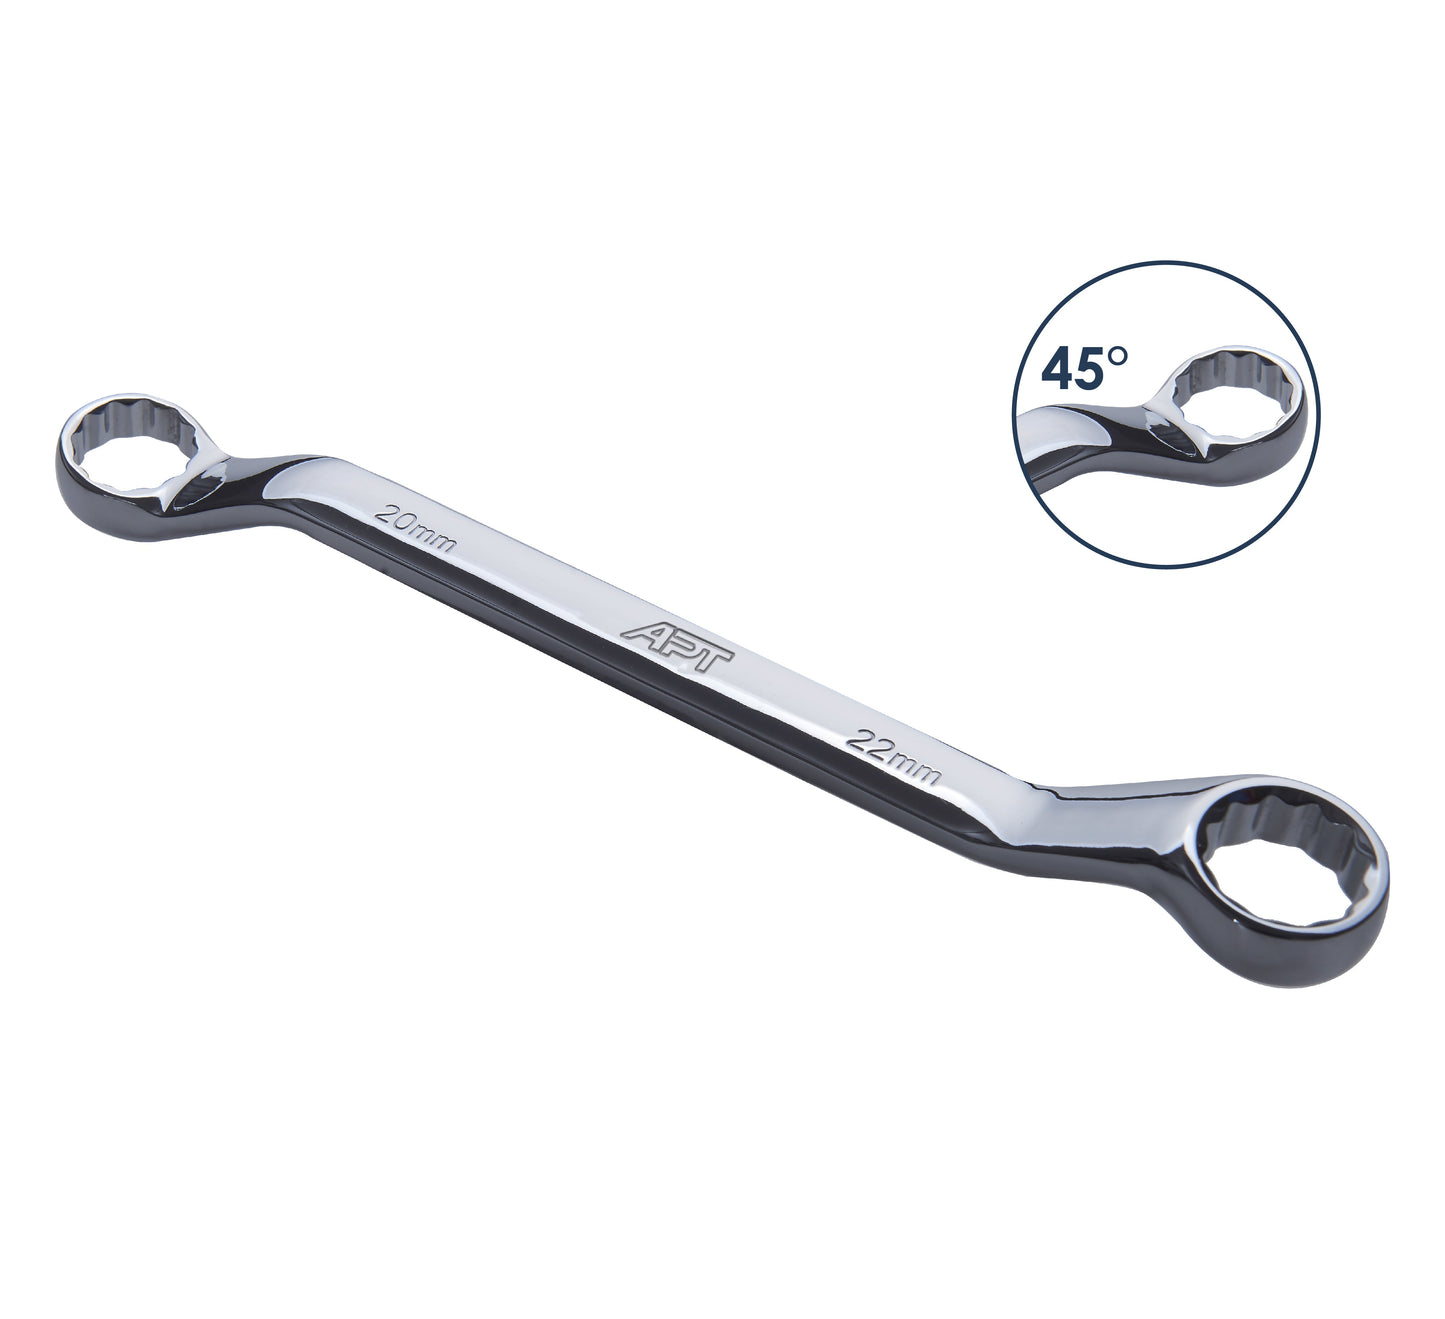 APT DOUBLE OFFSET RING WRENCH BRIGHT SATIN FINISH PP CARD HOLDER CR-V 12X13MM-DW201401-12X13